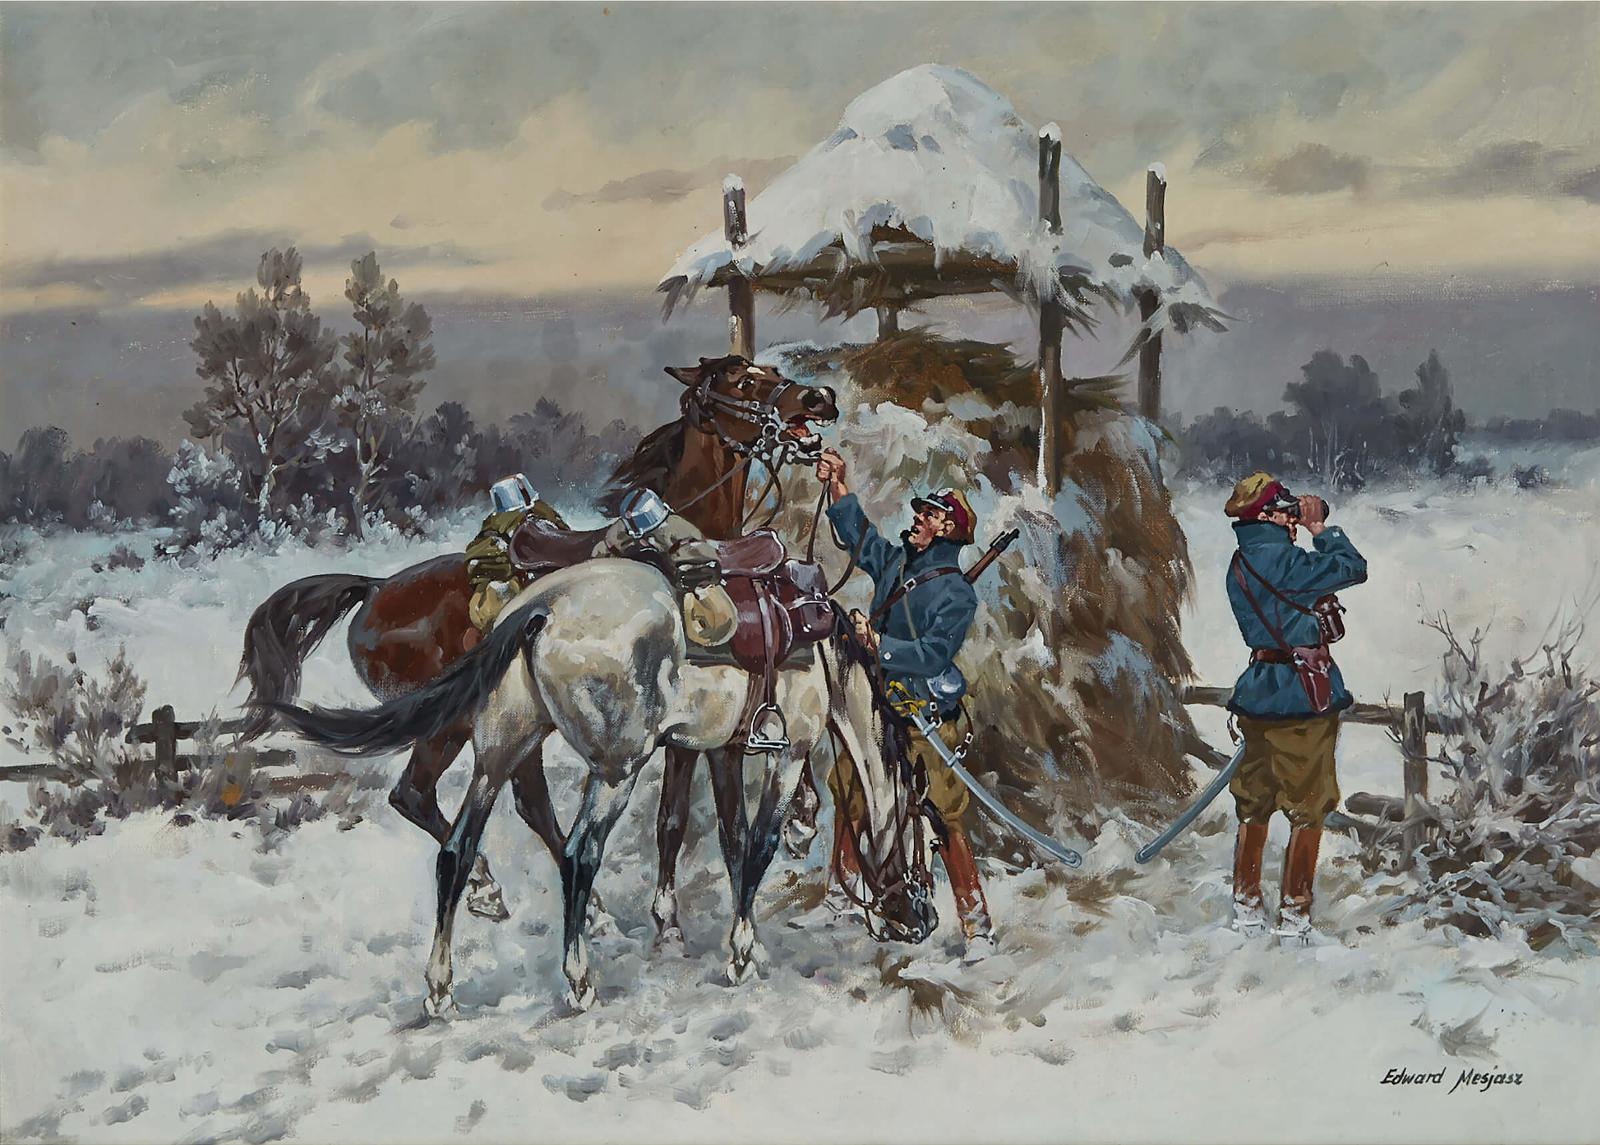 Edward Mesjasz (1929-2007) - Winter Patrol (Two Polish Officers And Their Horses In Snow)